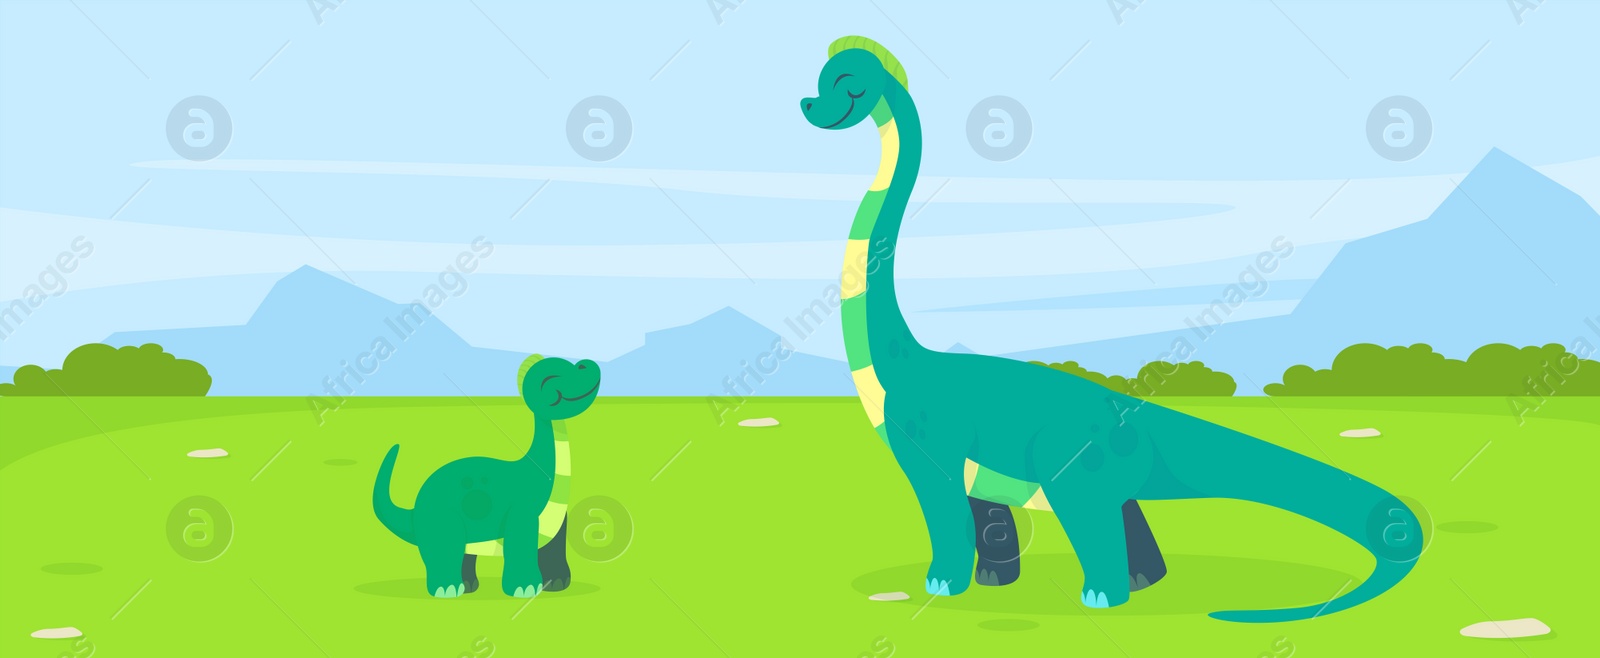 Illustration of Two dinosaurs on green meadow, illustration. banner design